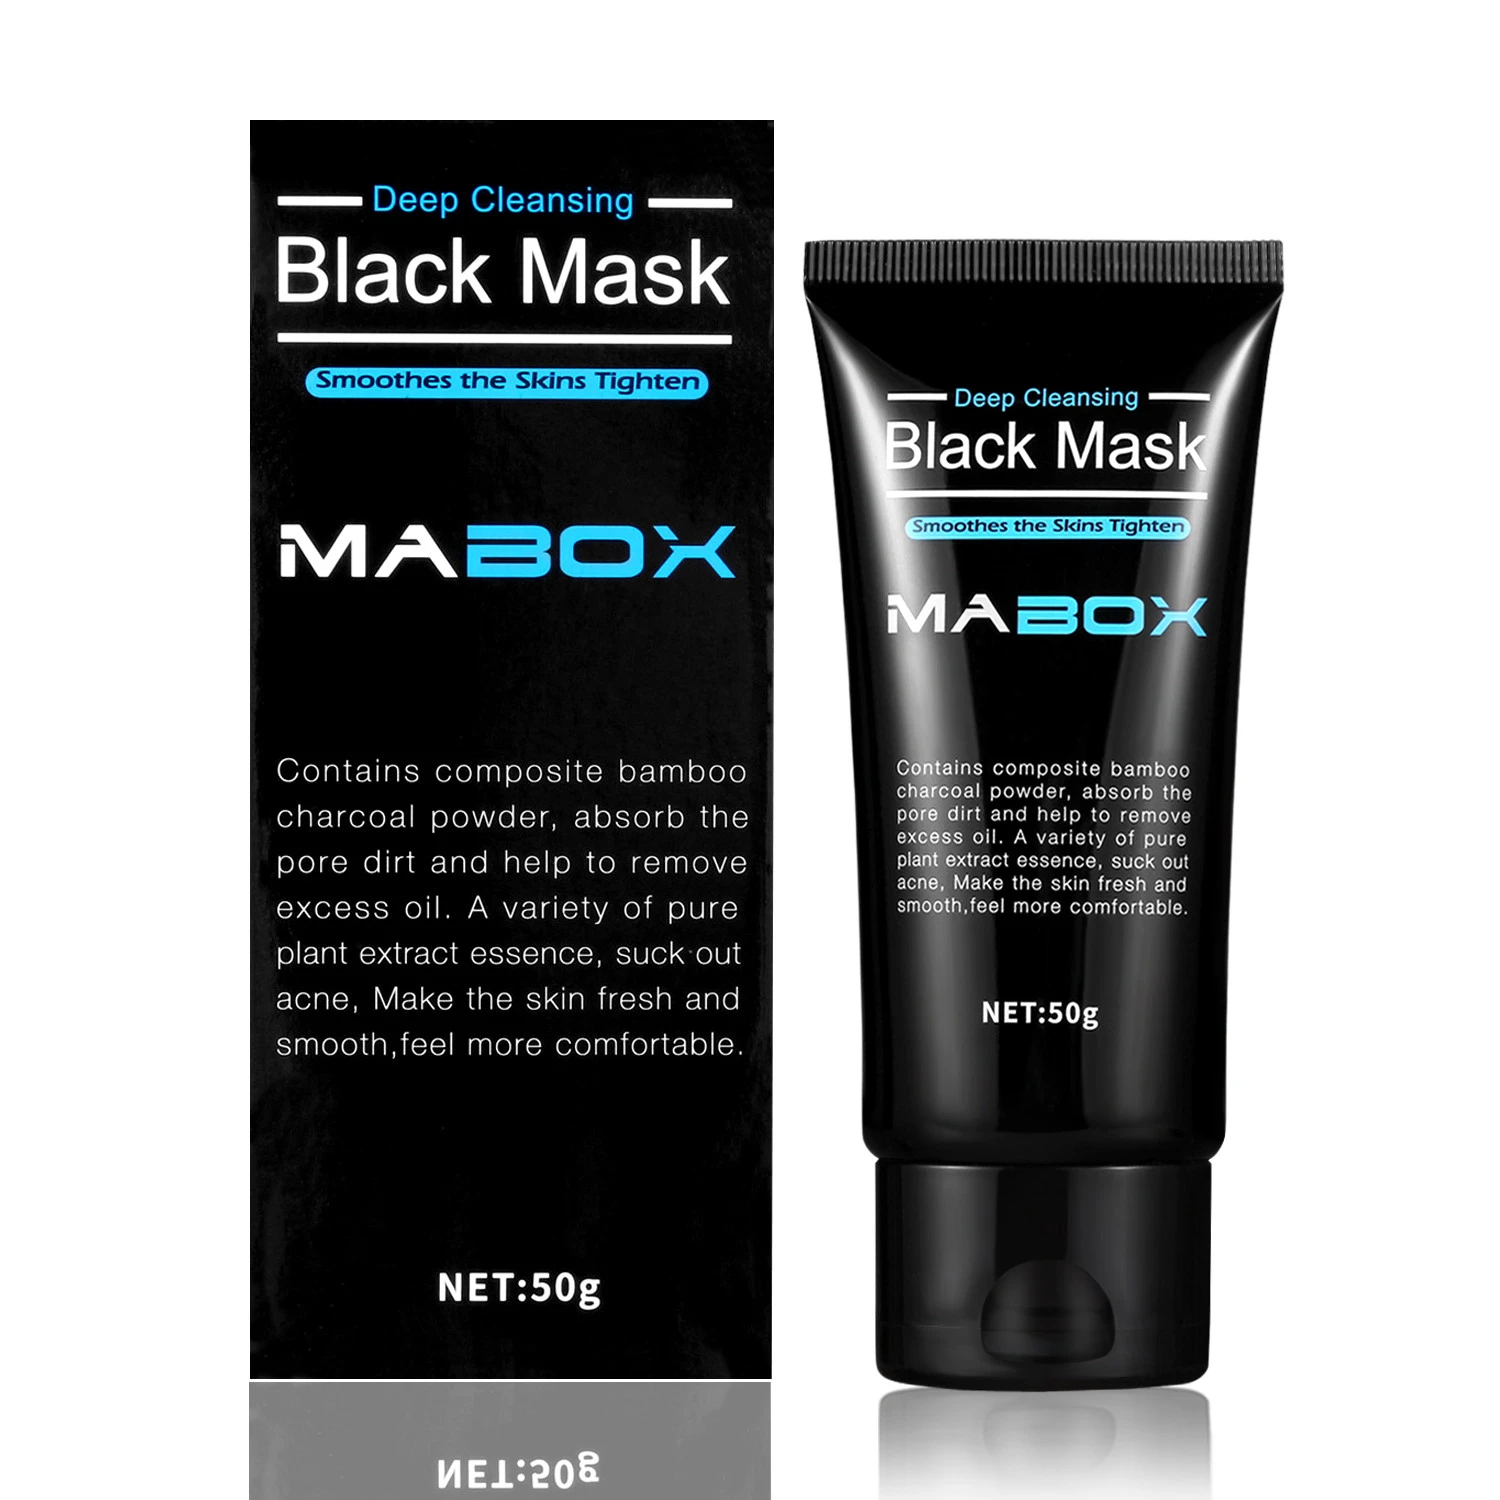 Mabox Black Mask Facial Blackhead Remover Purifying Peel-off Mask Black Mud Pore Removal Mask For Face Nose Acne Treatment